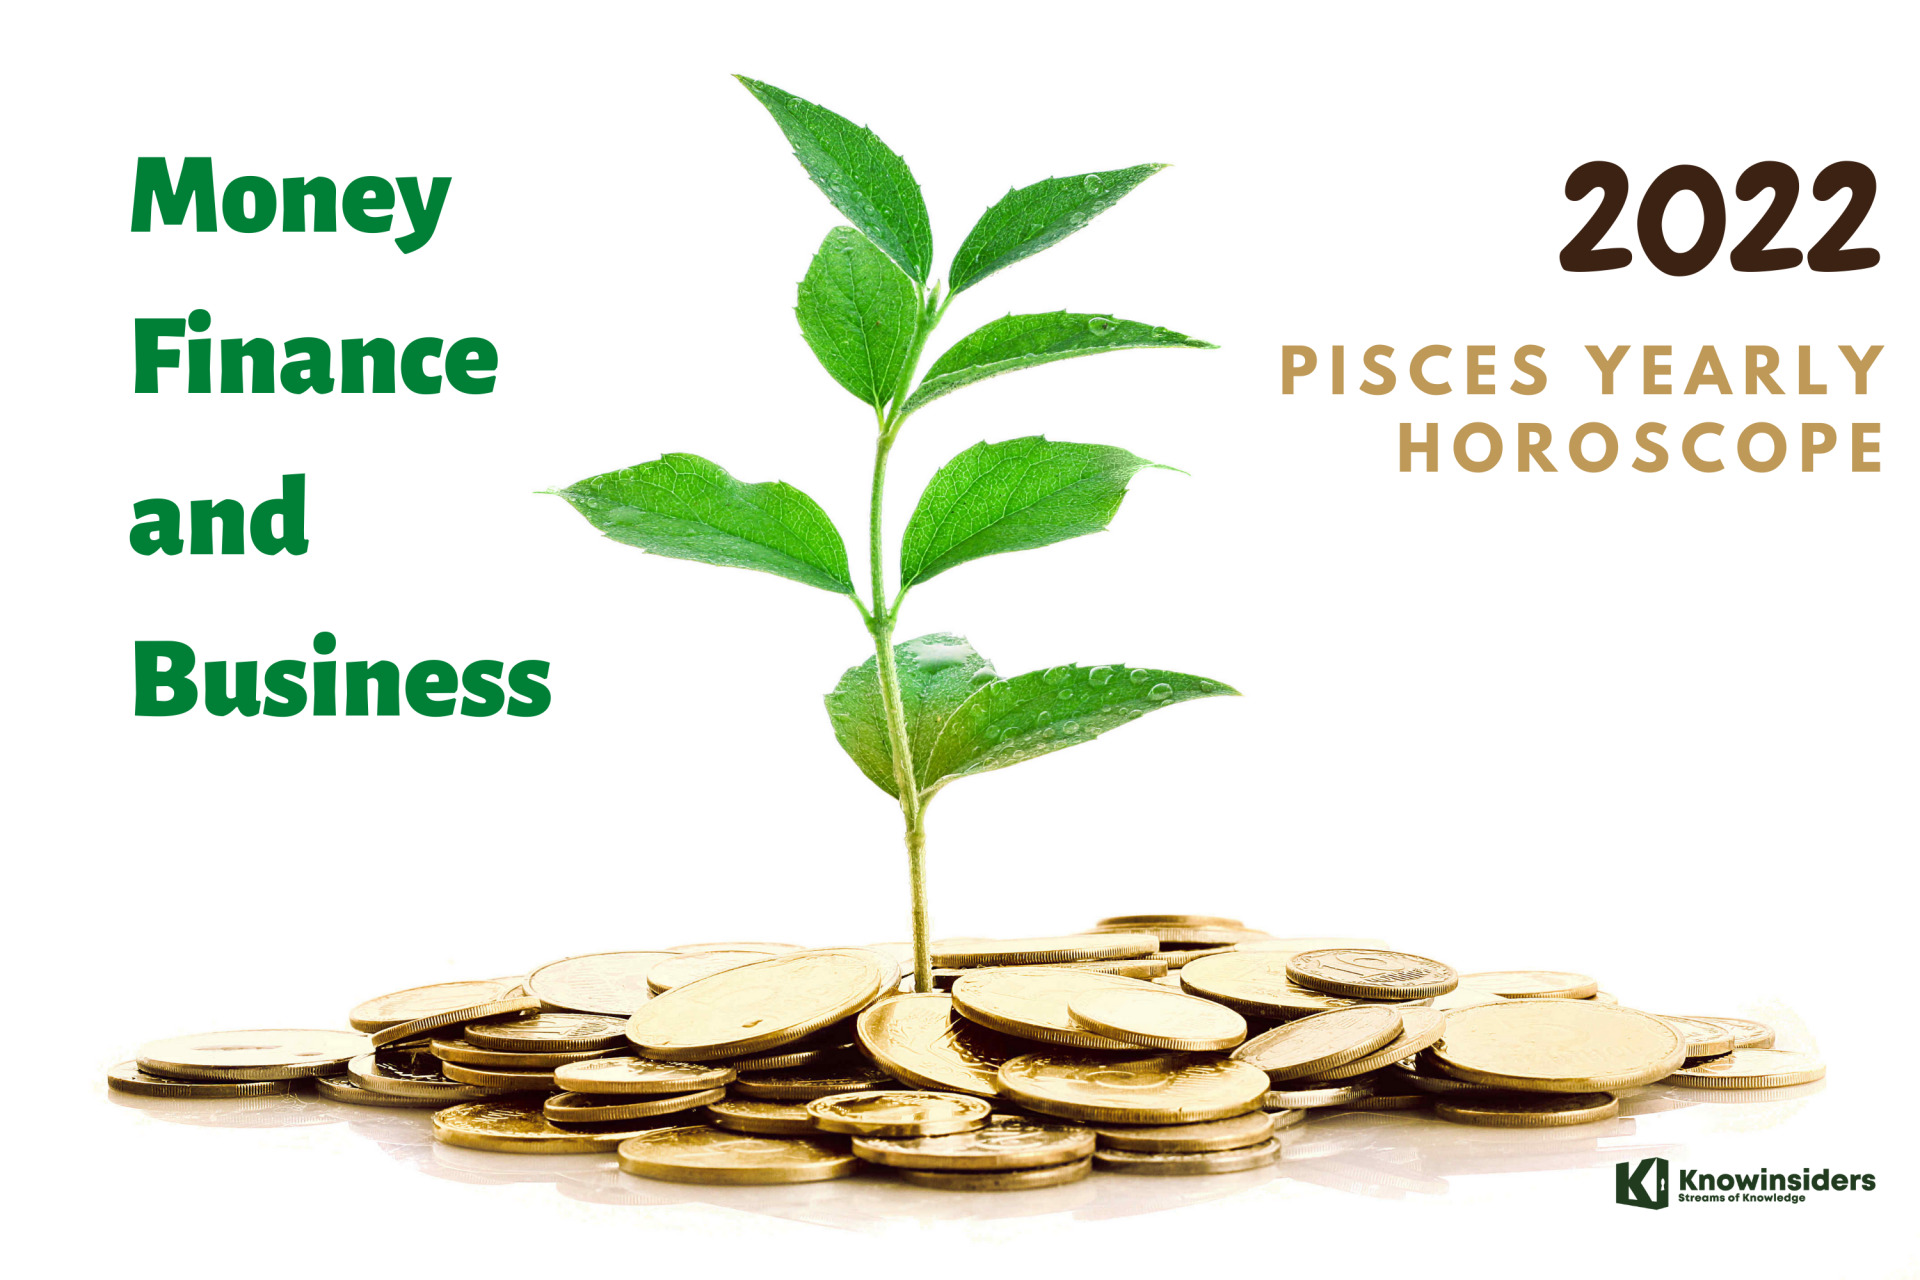 PISCES Yearly Horoscope 2022: Predictions for Money, Finance and Business